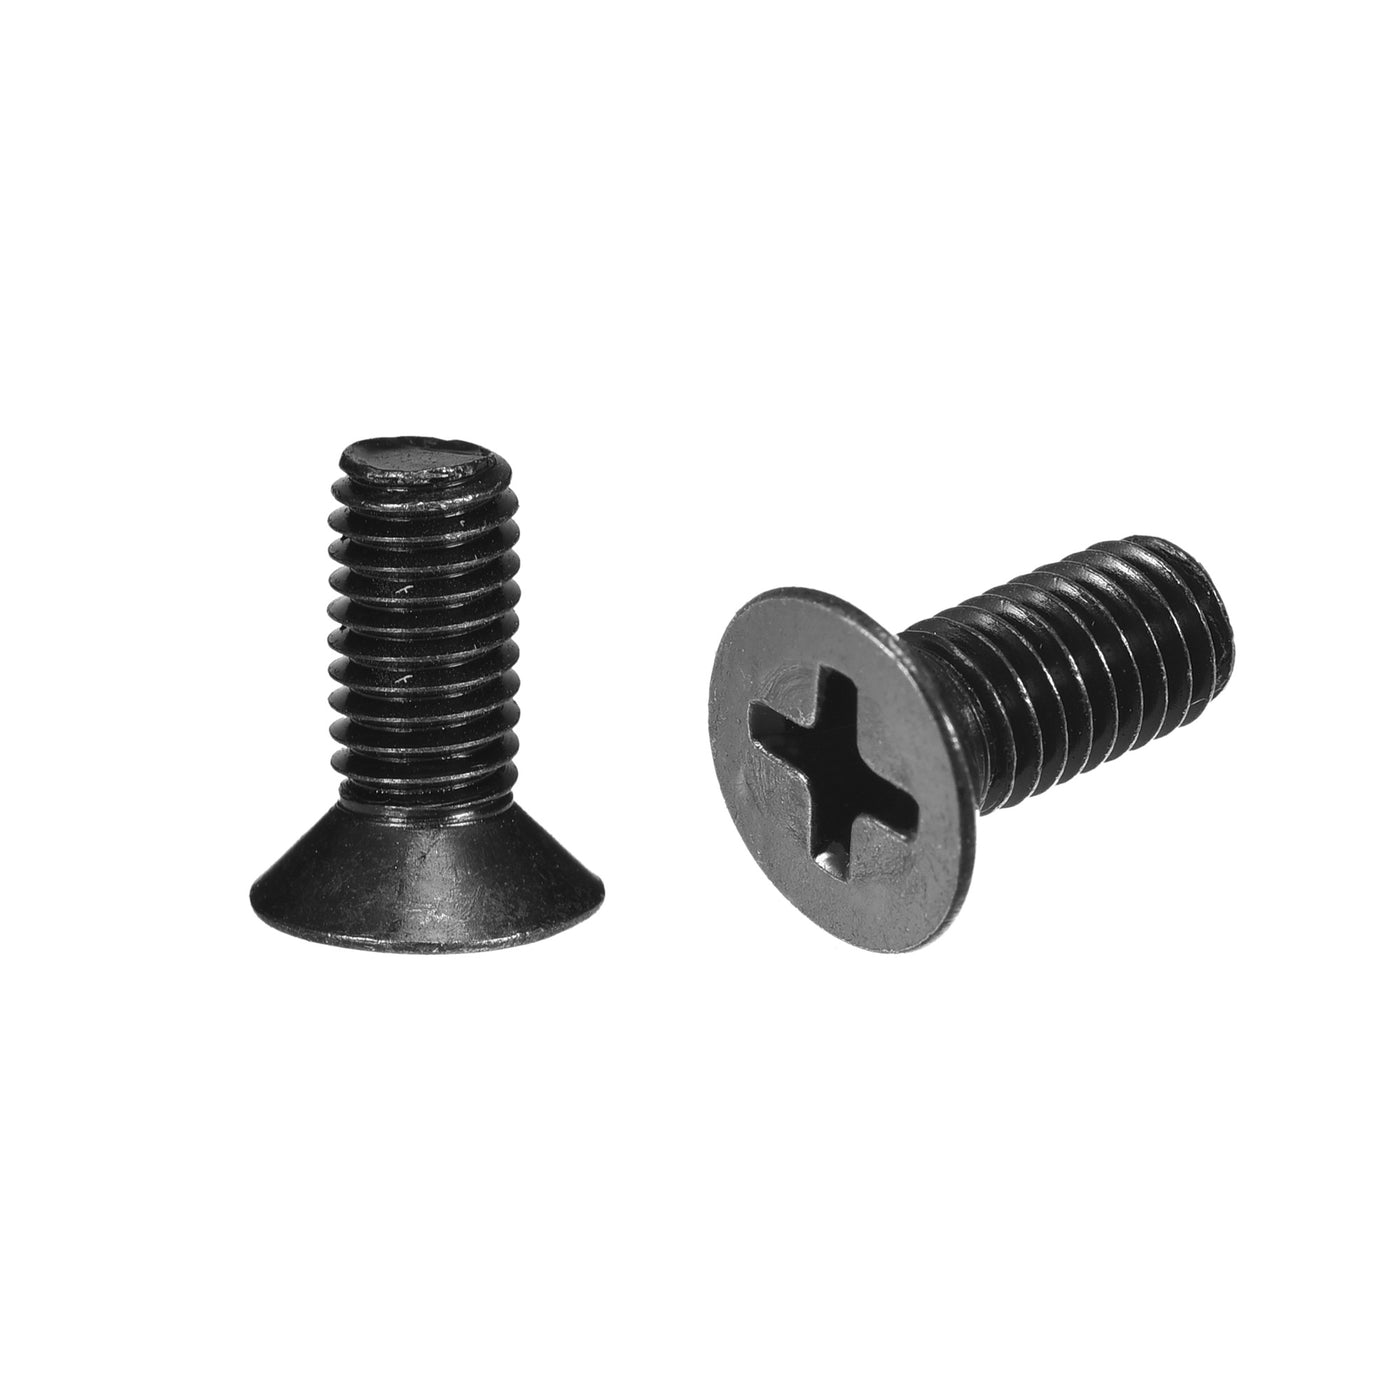 uxcell Uxcell M5 x 12mm Phillips Flat Head Screws Carbon Steel Machine Screws Black for Home Office Computer Case Appliance Equipment 50pcs